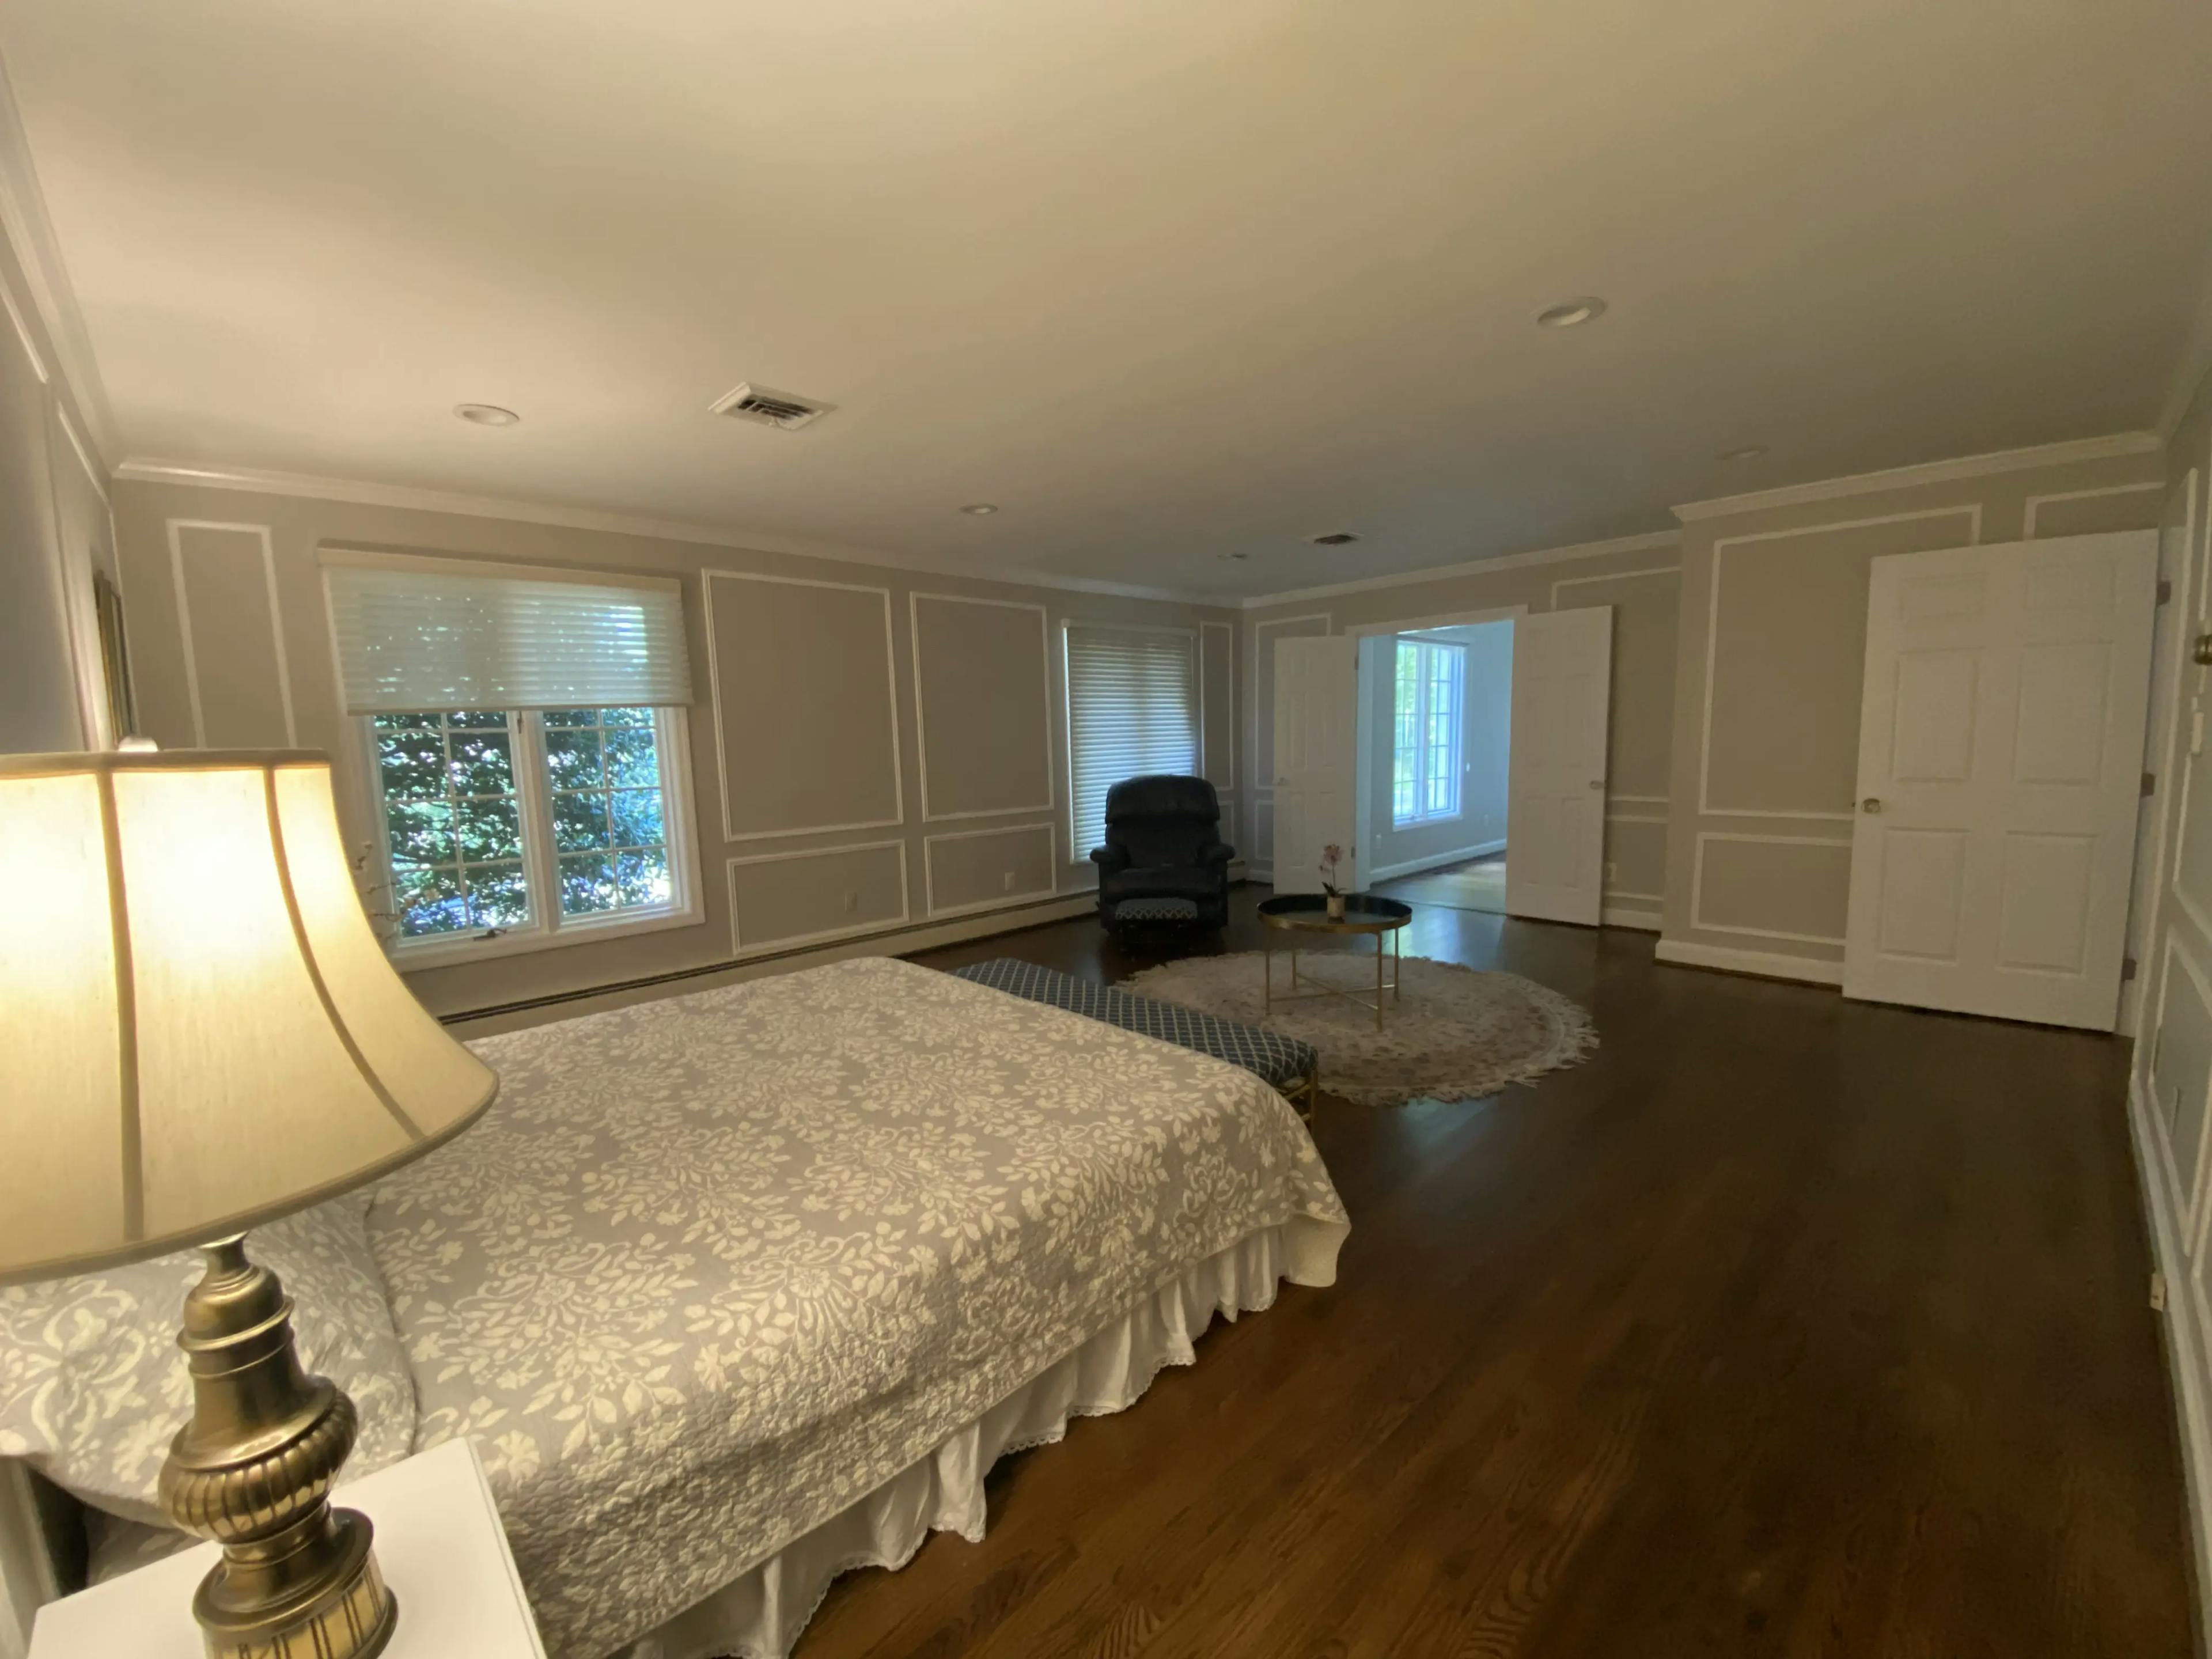 Westmont Suite - A Private, Spacious Room